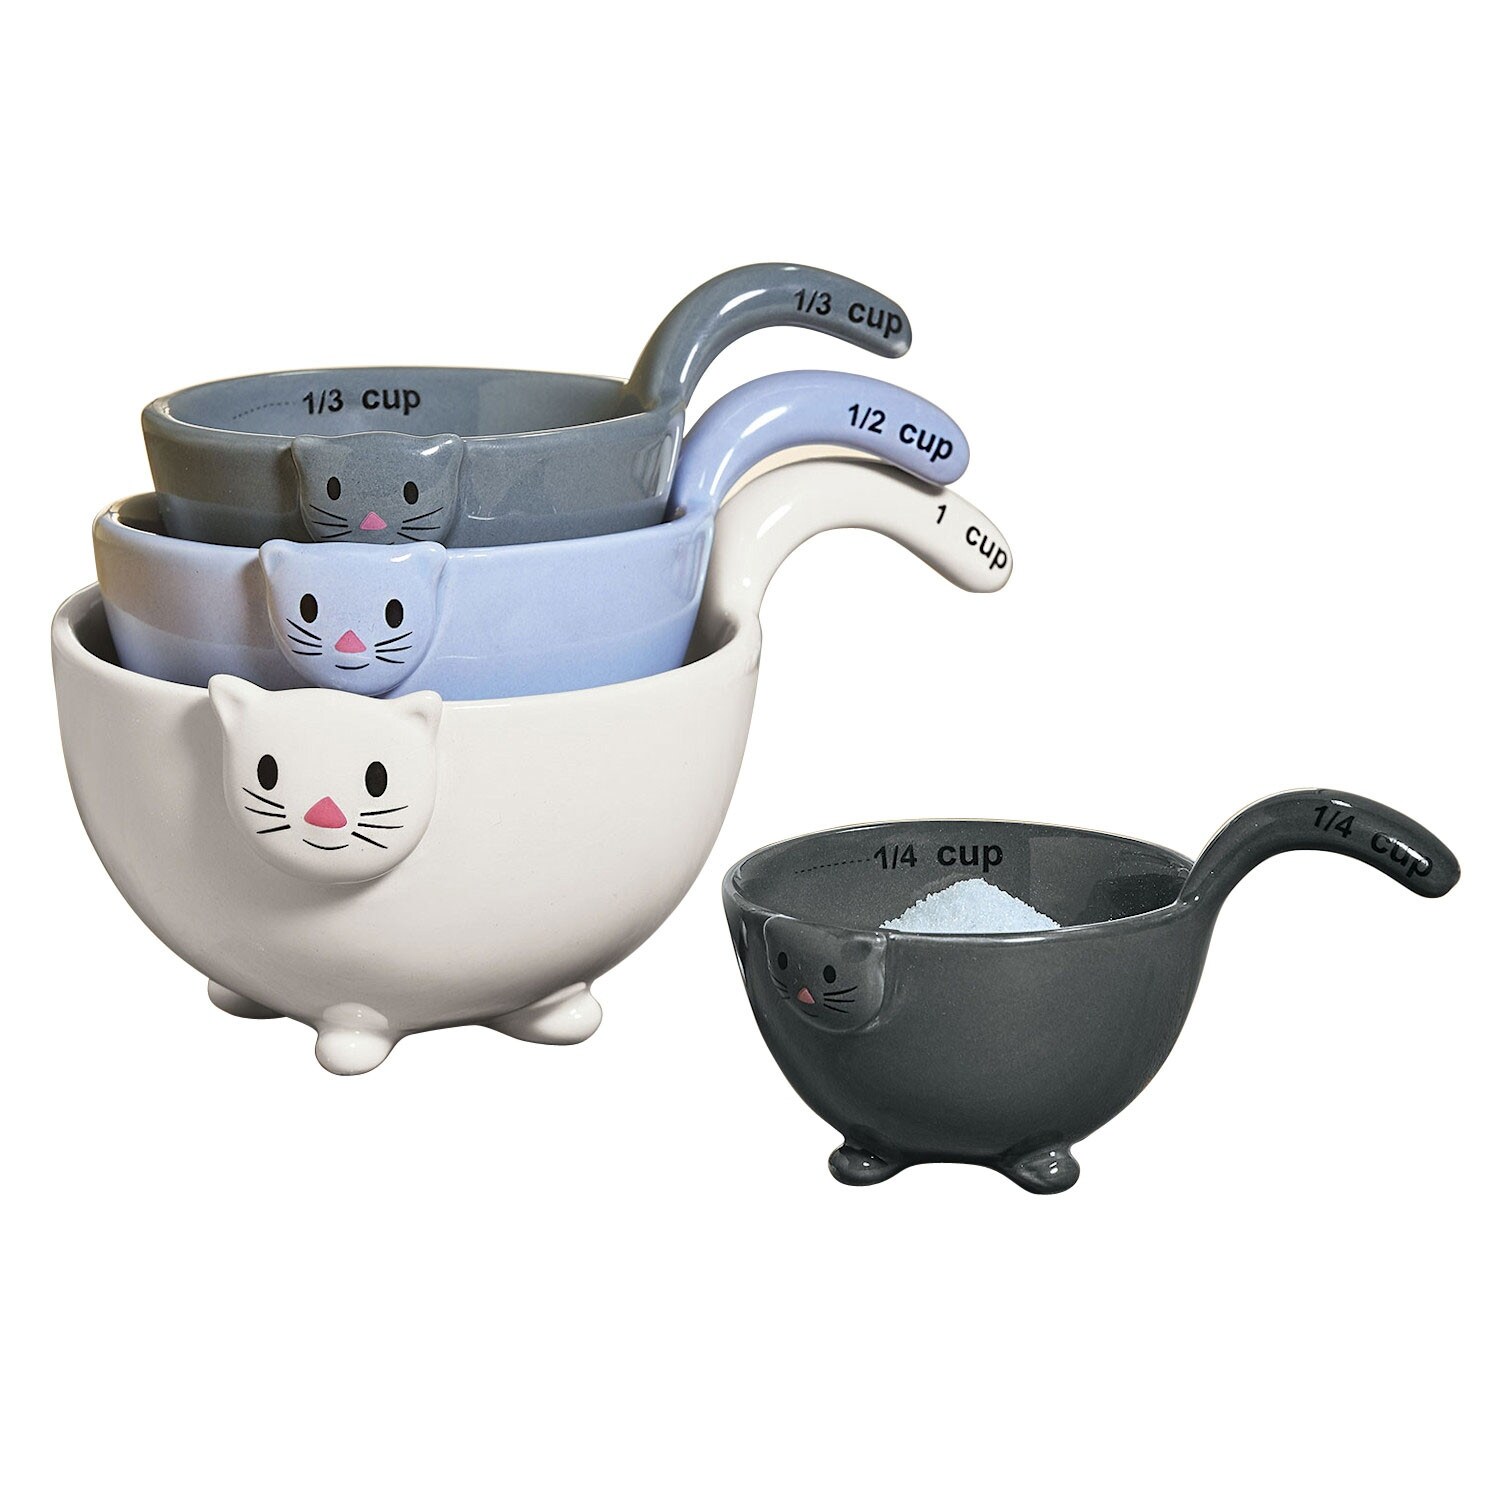 https://ak1.ostkcdn.com/images/products/is/images/direct/32b6312fd89f8cf8399fc284379400b0818b7fbd/Cute-Ceramic-Cats-Measuring-Cups-Set---Stackable-Kitchen-Utensils---1-4-Cup%2C-1-3-Cup%2C-1-2-Cup-and-1-Cup-Sizes.jpg